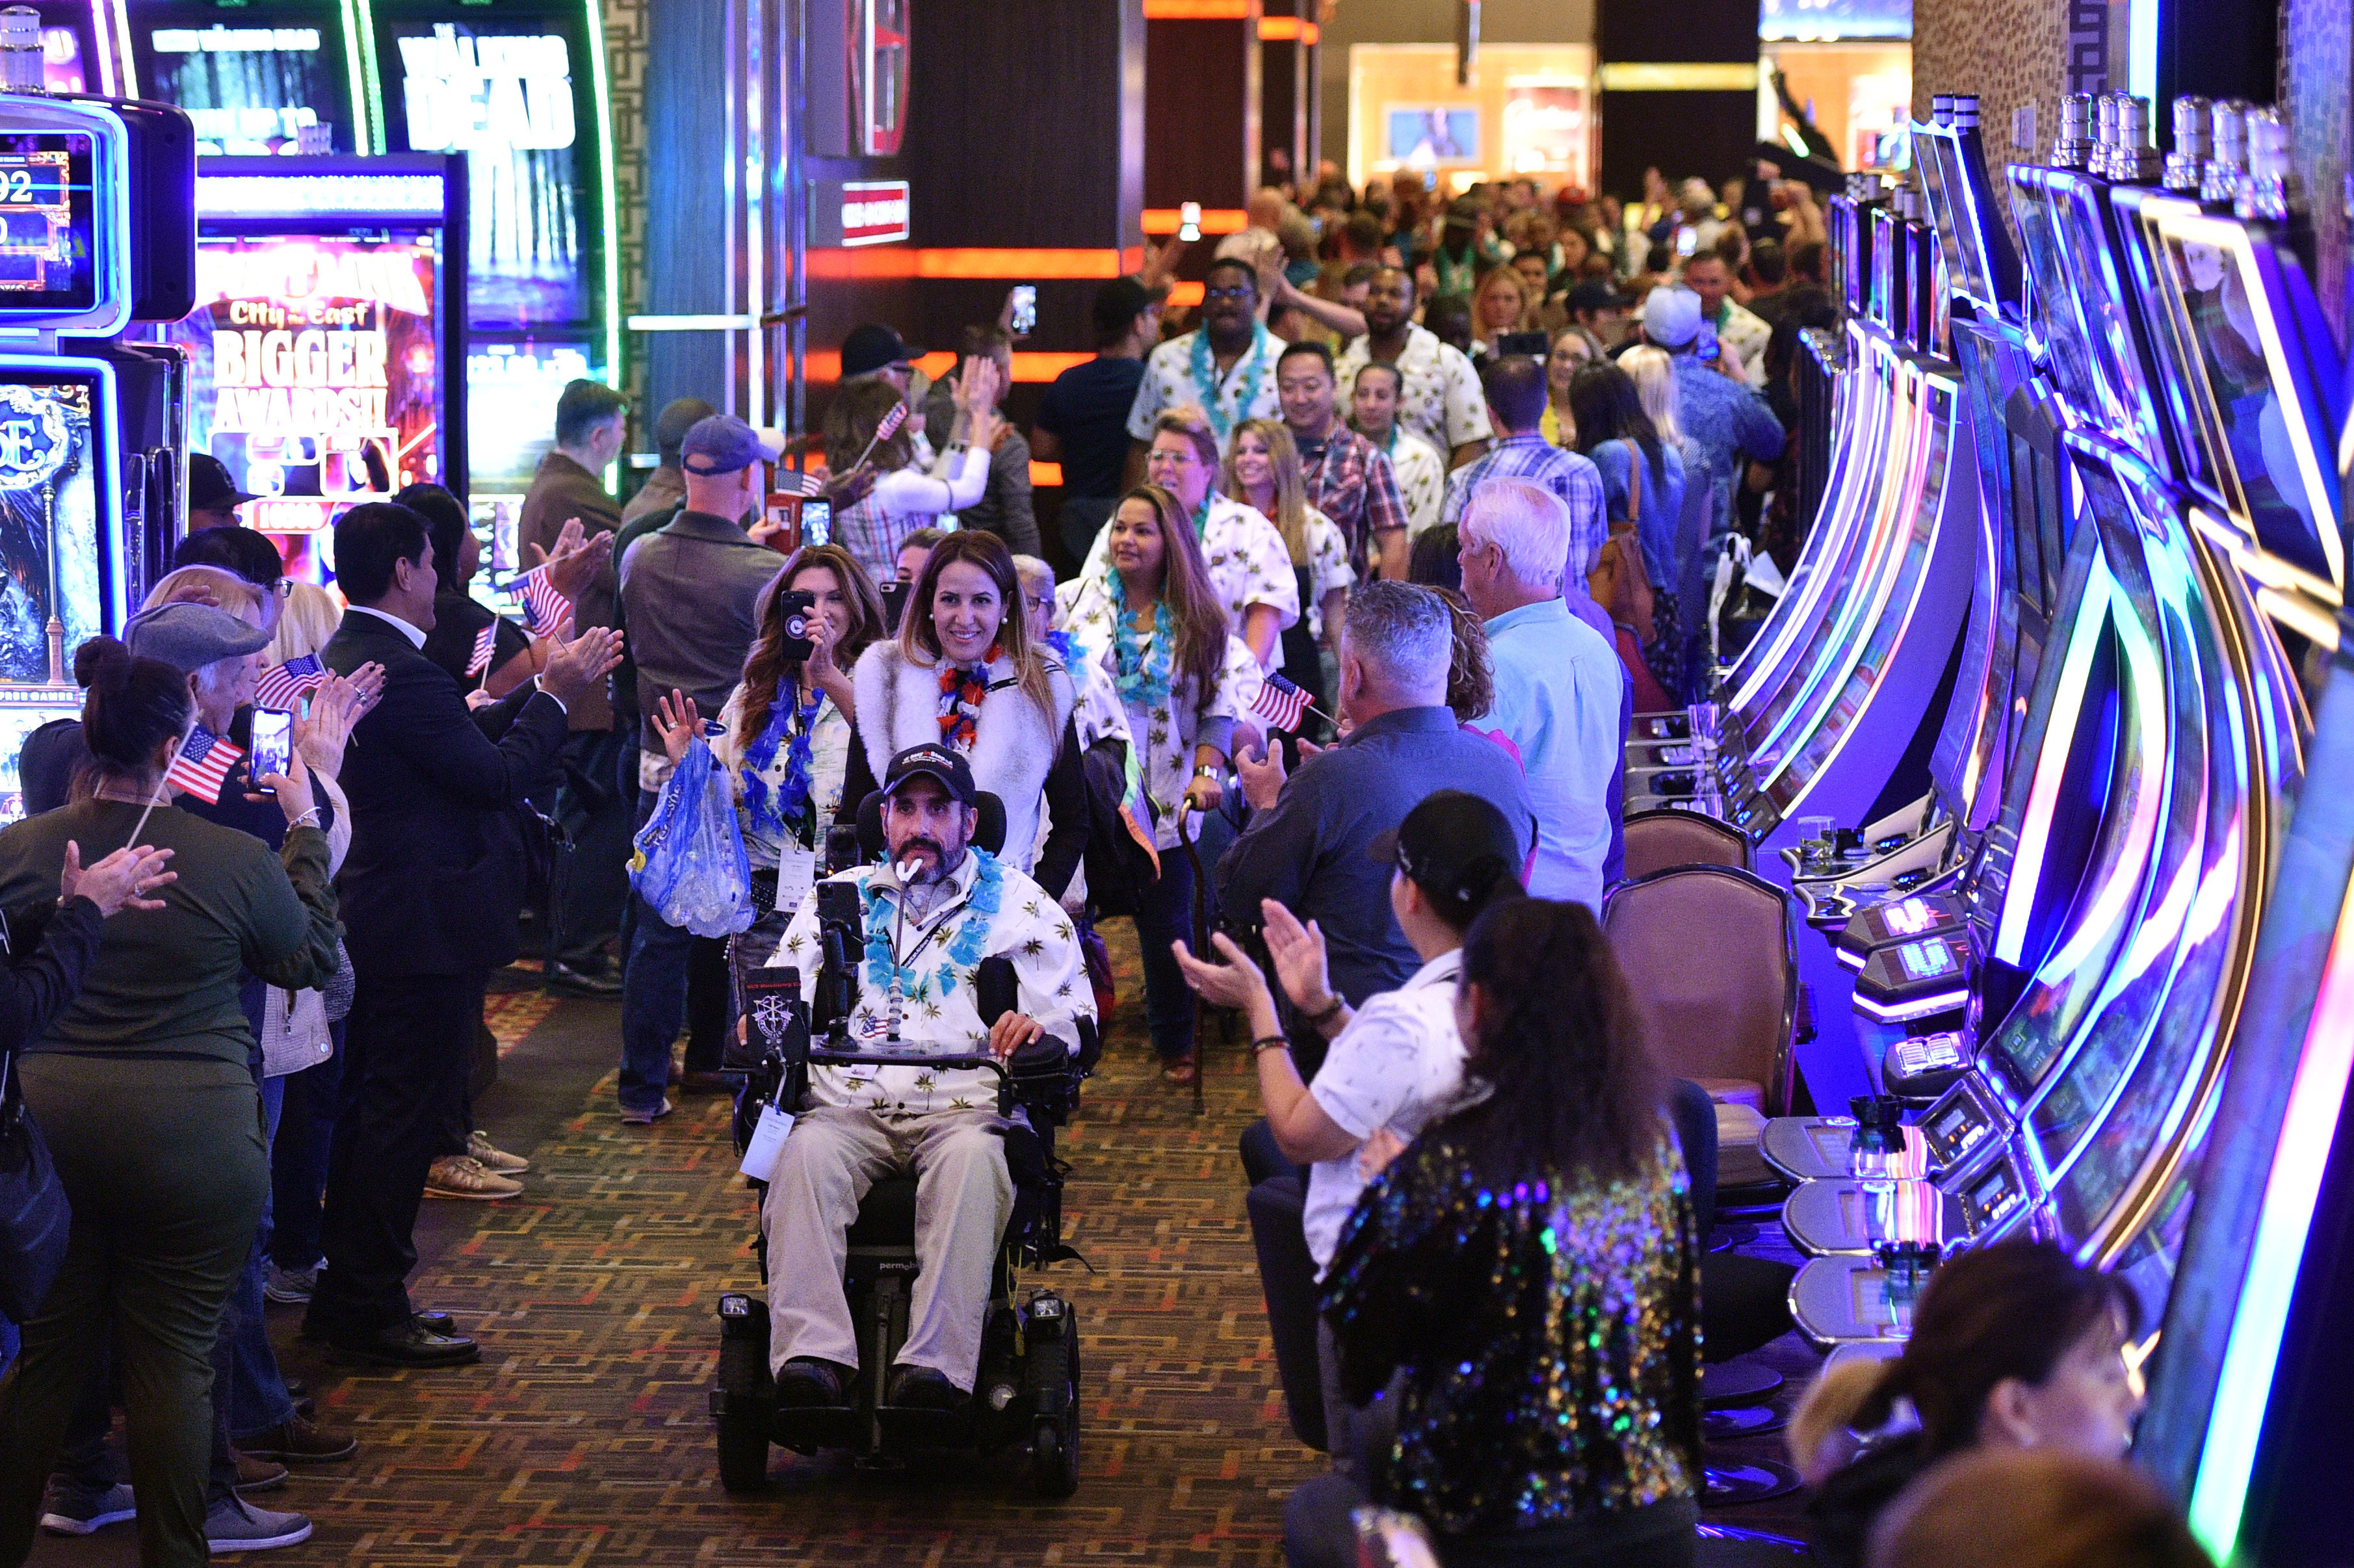 U.S. Army veteran Romy Camargo of Florida is wheeled through the “Walk of Gratitude” as part of the Salute the Troops event at the the Golden Nugget Hotel & Casino in Las Vegas, Nevada, on November 9, 2019. | Source: Getty Images